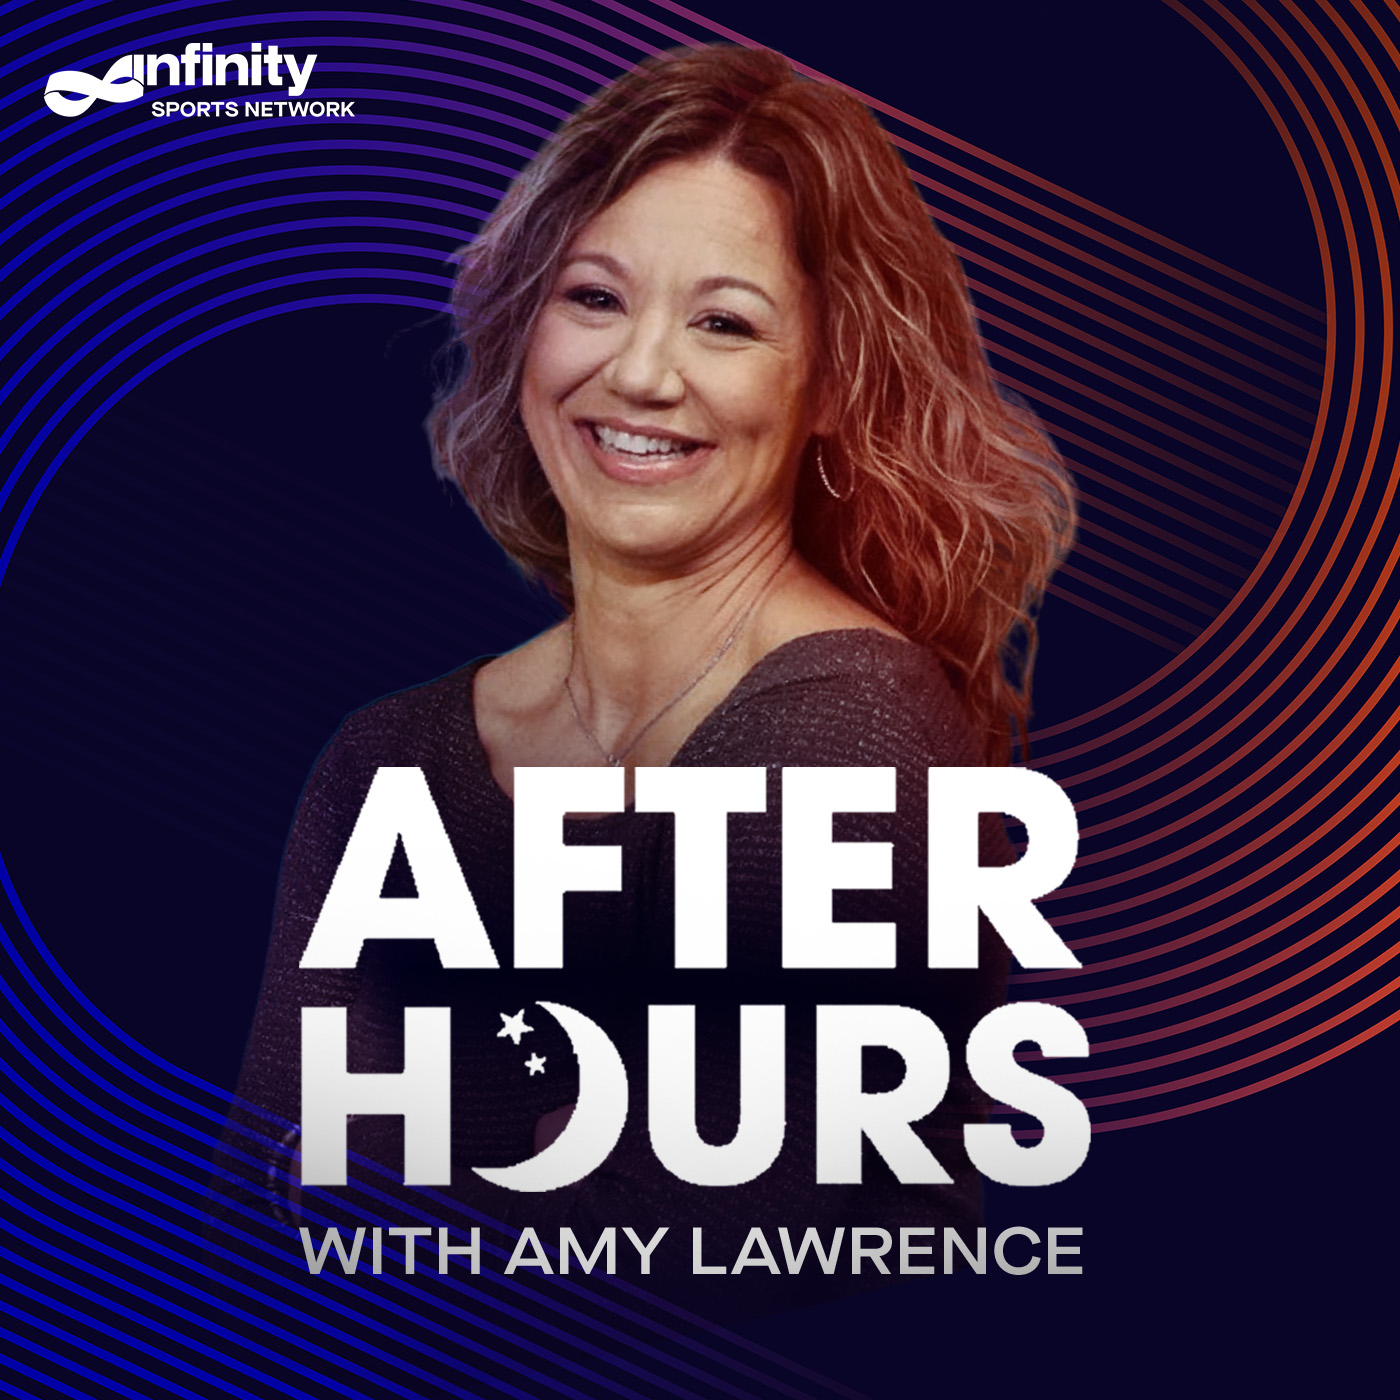 4/7/21 After Hours with Amy Lawrence PODCAST: Hour 2